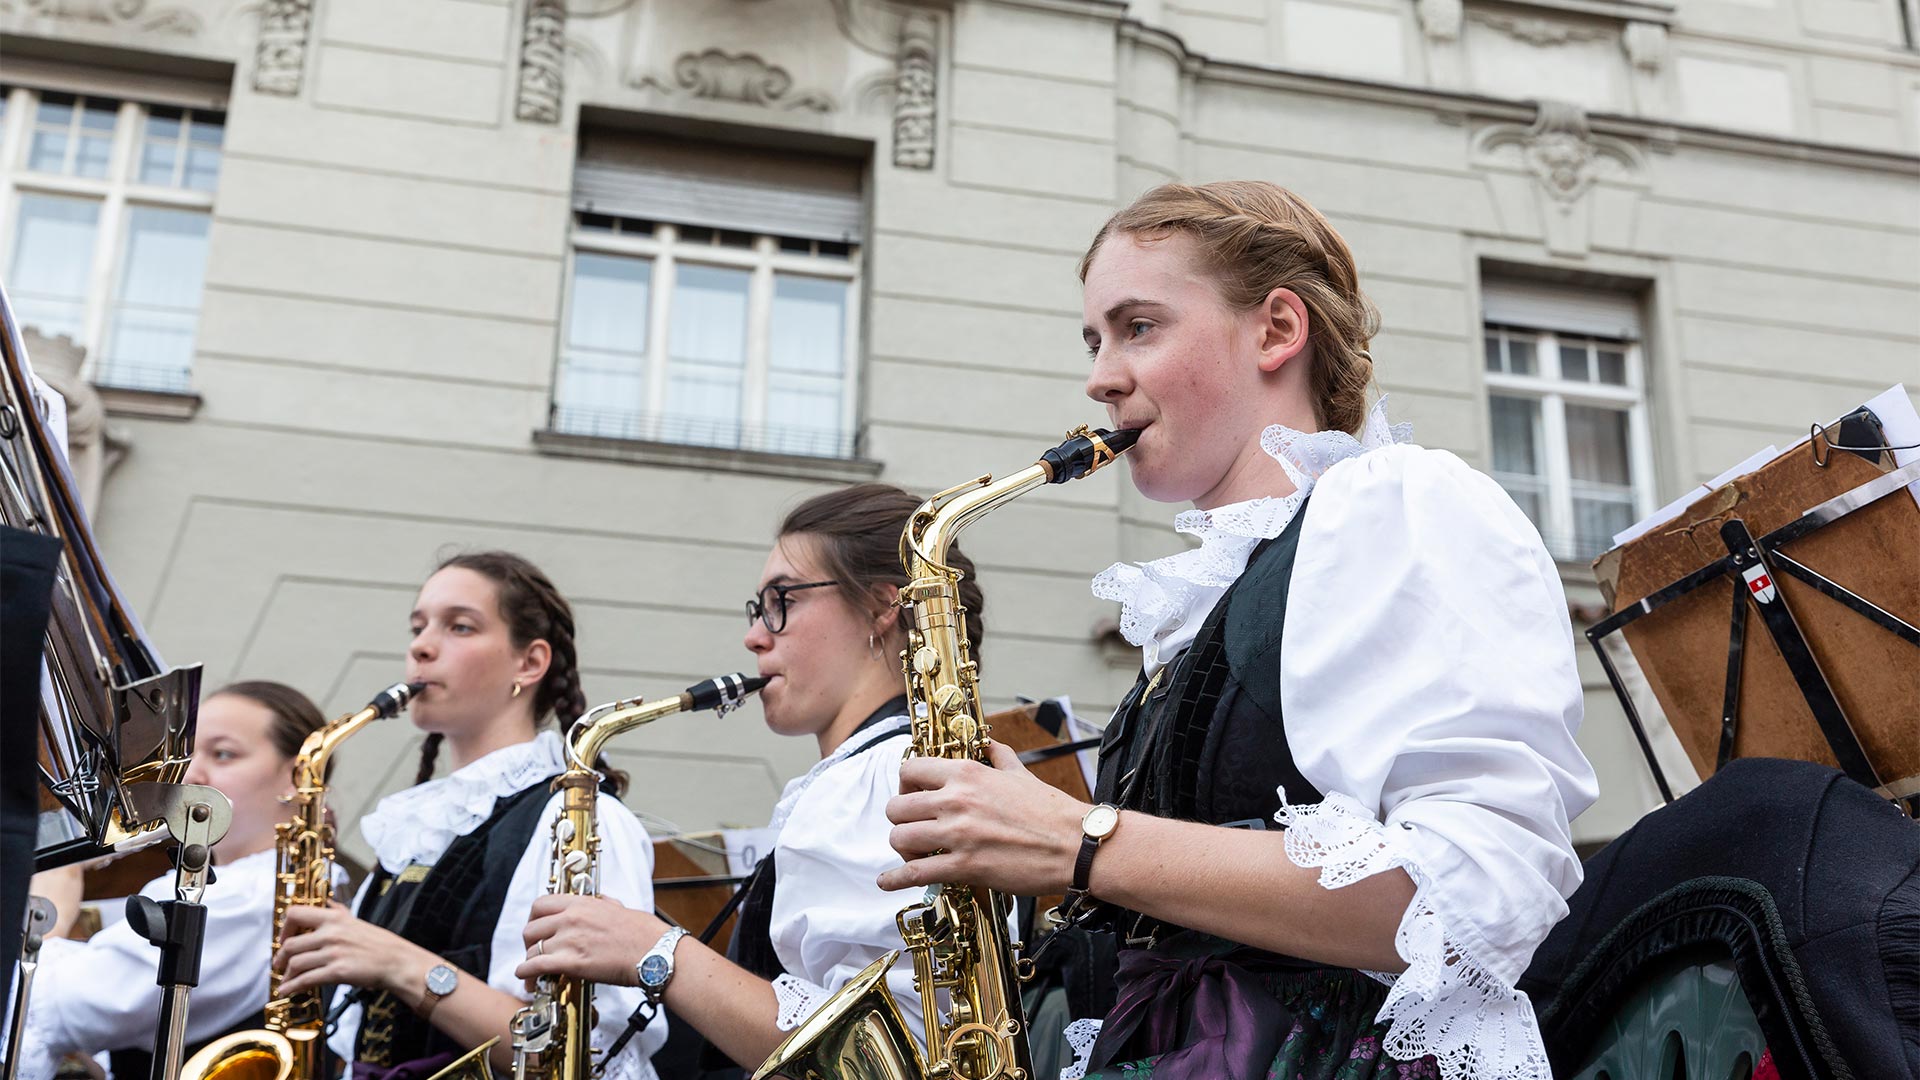 In the foreground a part of the South Tyrolean band is playing wind instruments at a musical event in the city.